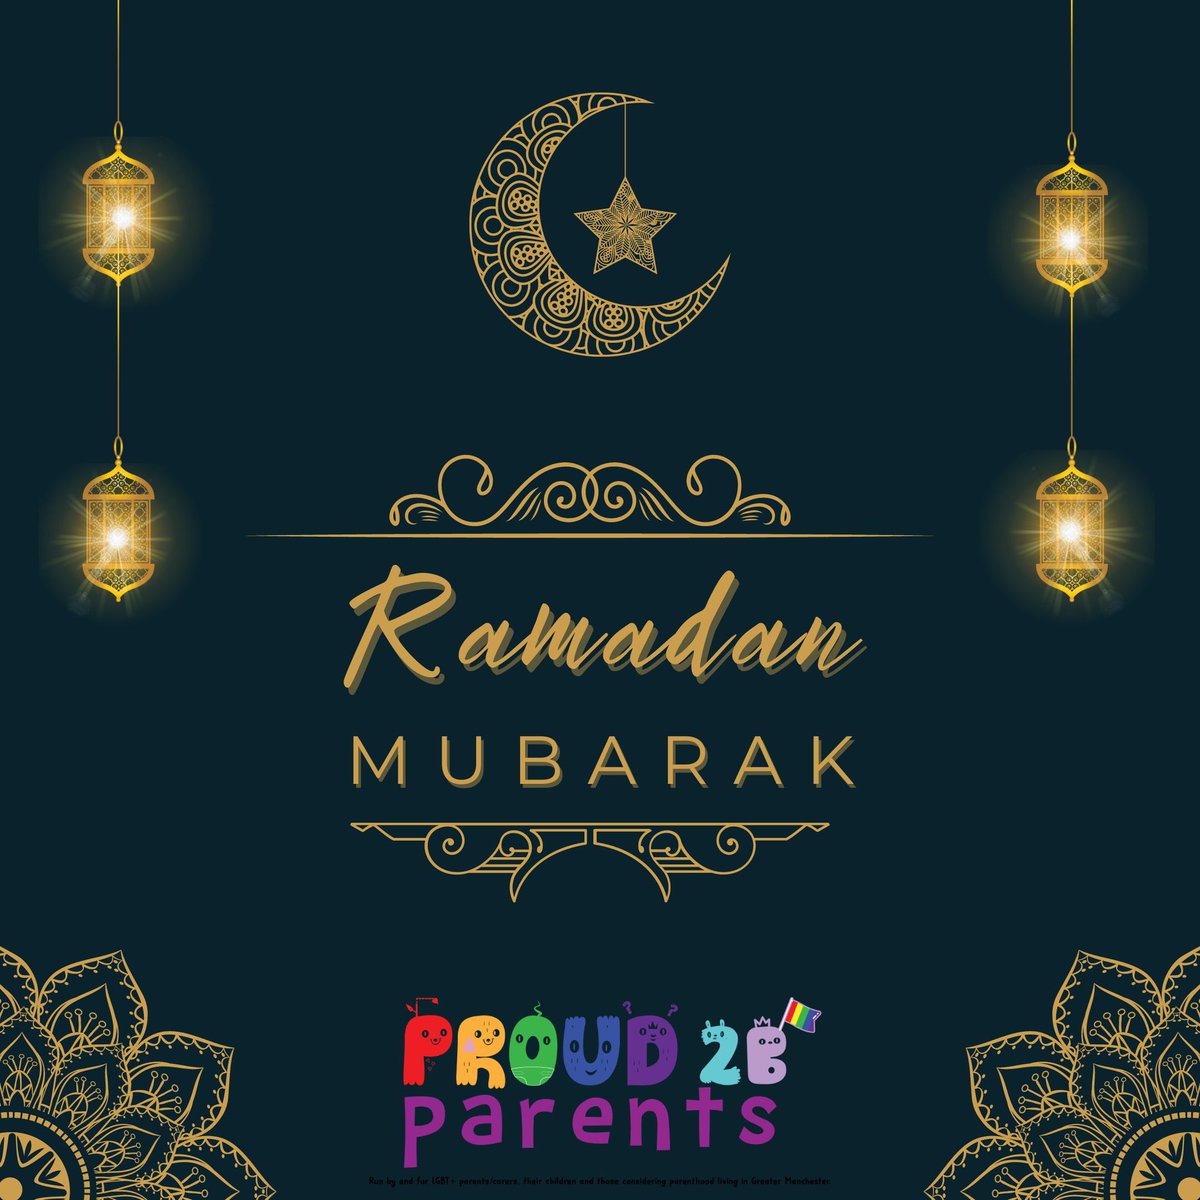 For everyone observing this month, including our friends at @HidayahLGBTQI, we wish you a happy and blessed Ramadan. ✨Ramadan Mubarak